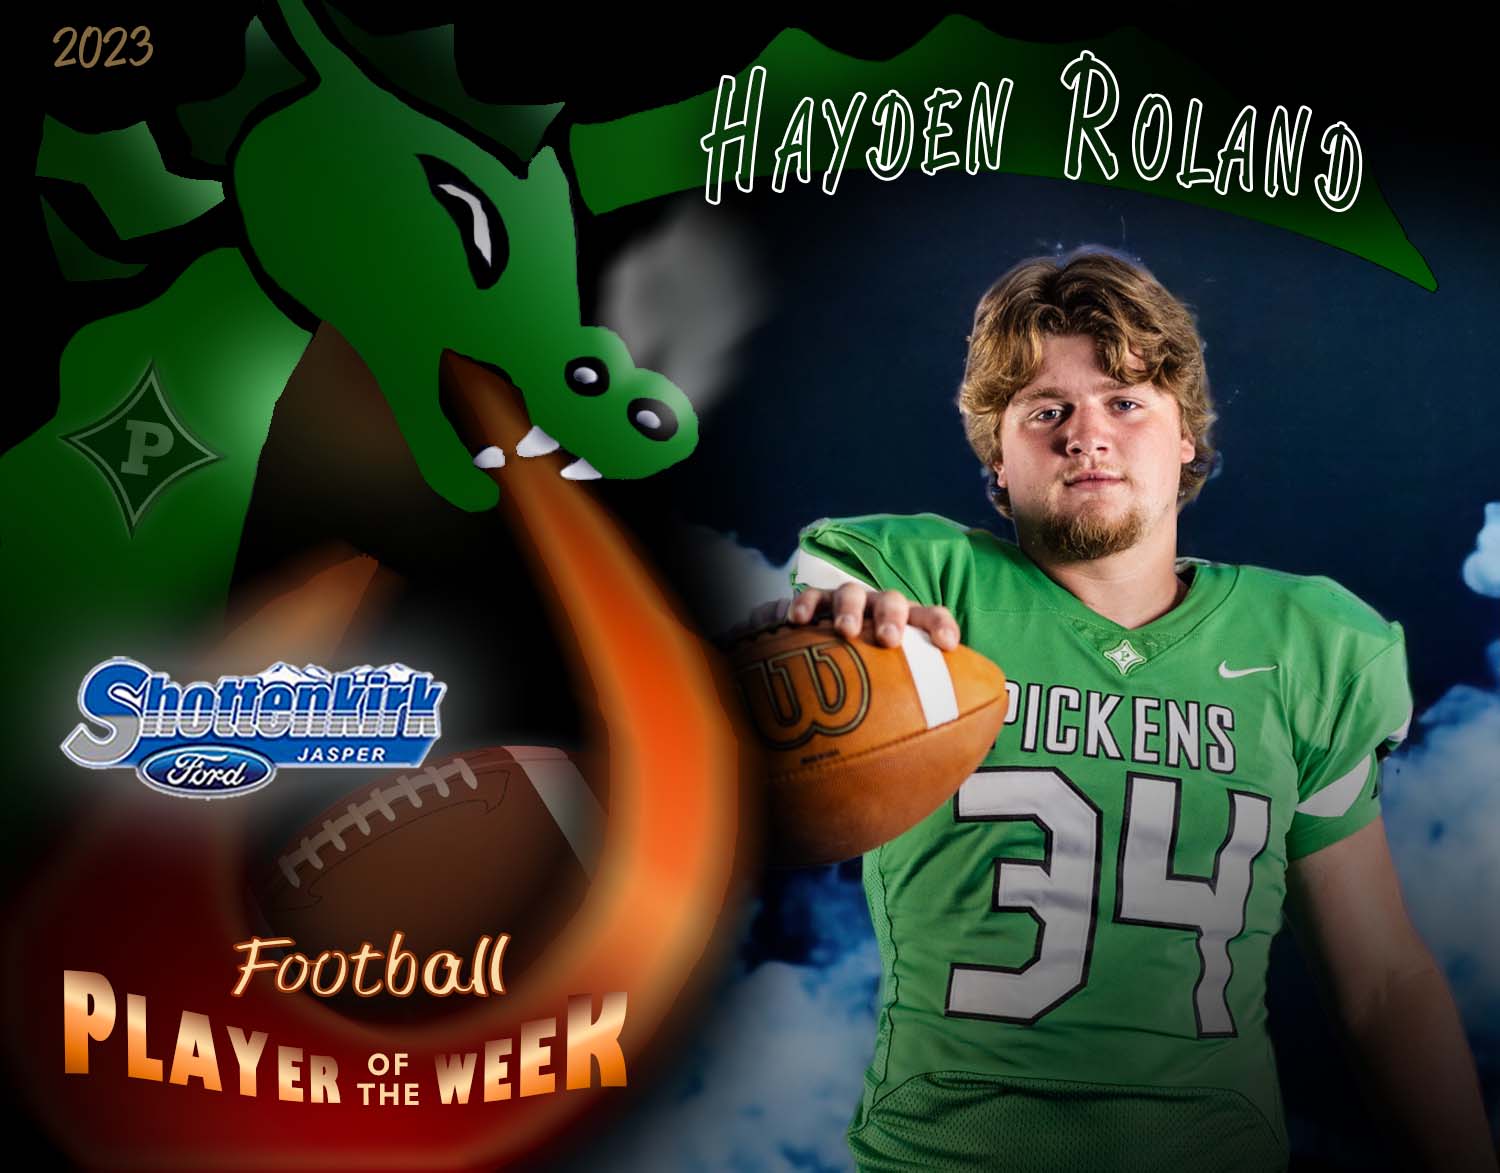 PHS Football Player of the Week #3 - Hayden Roland